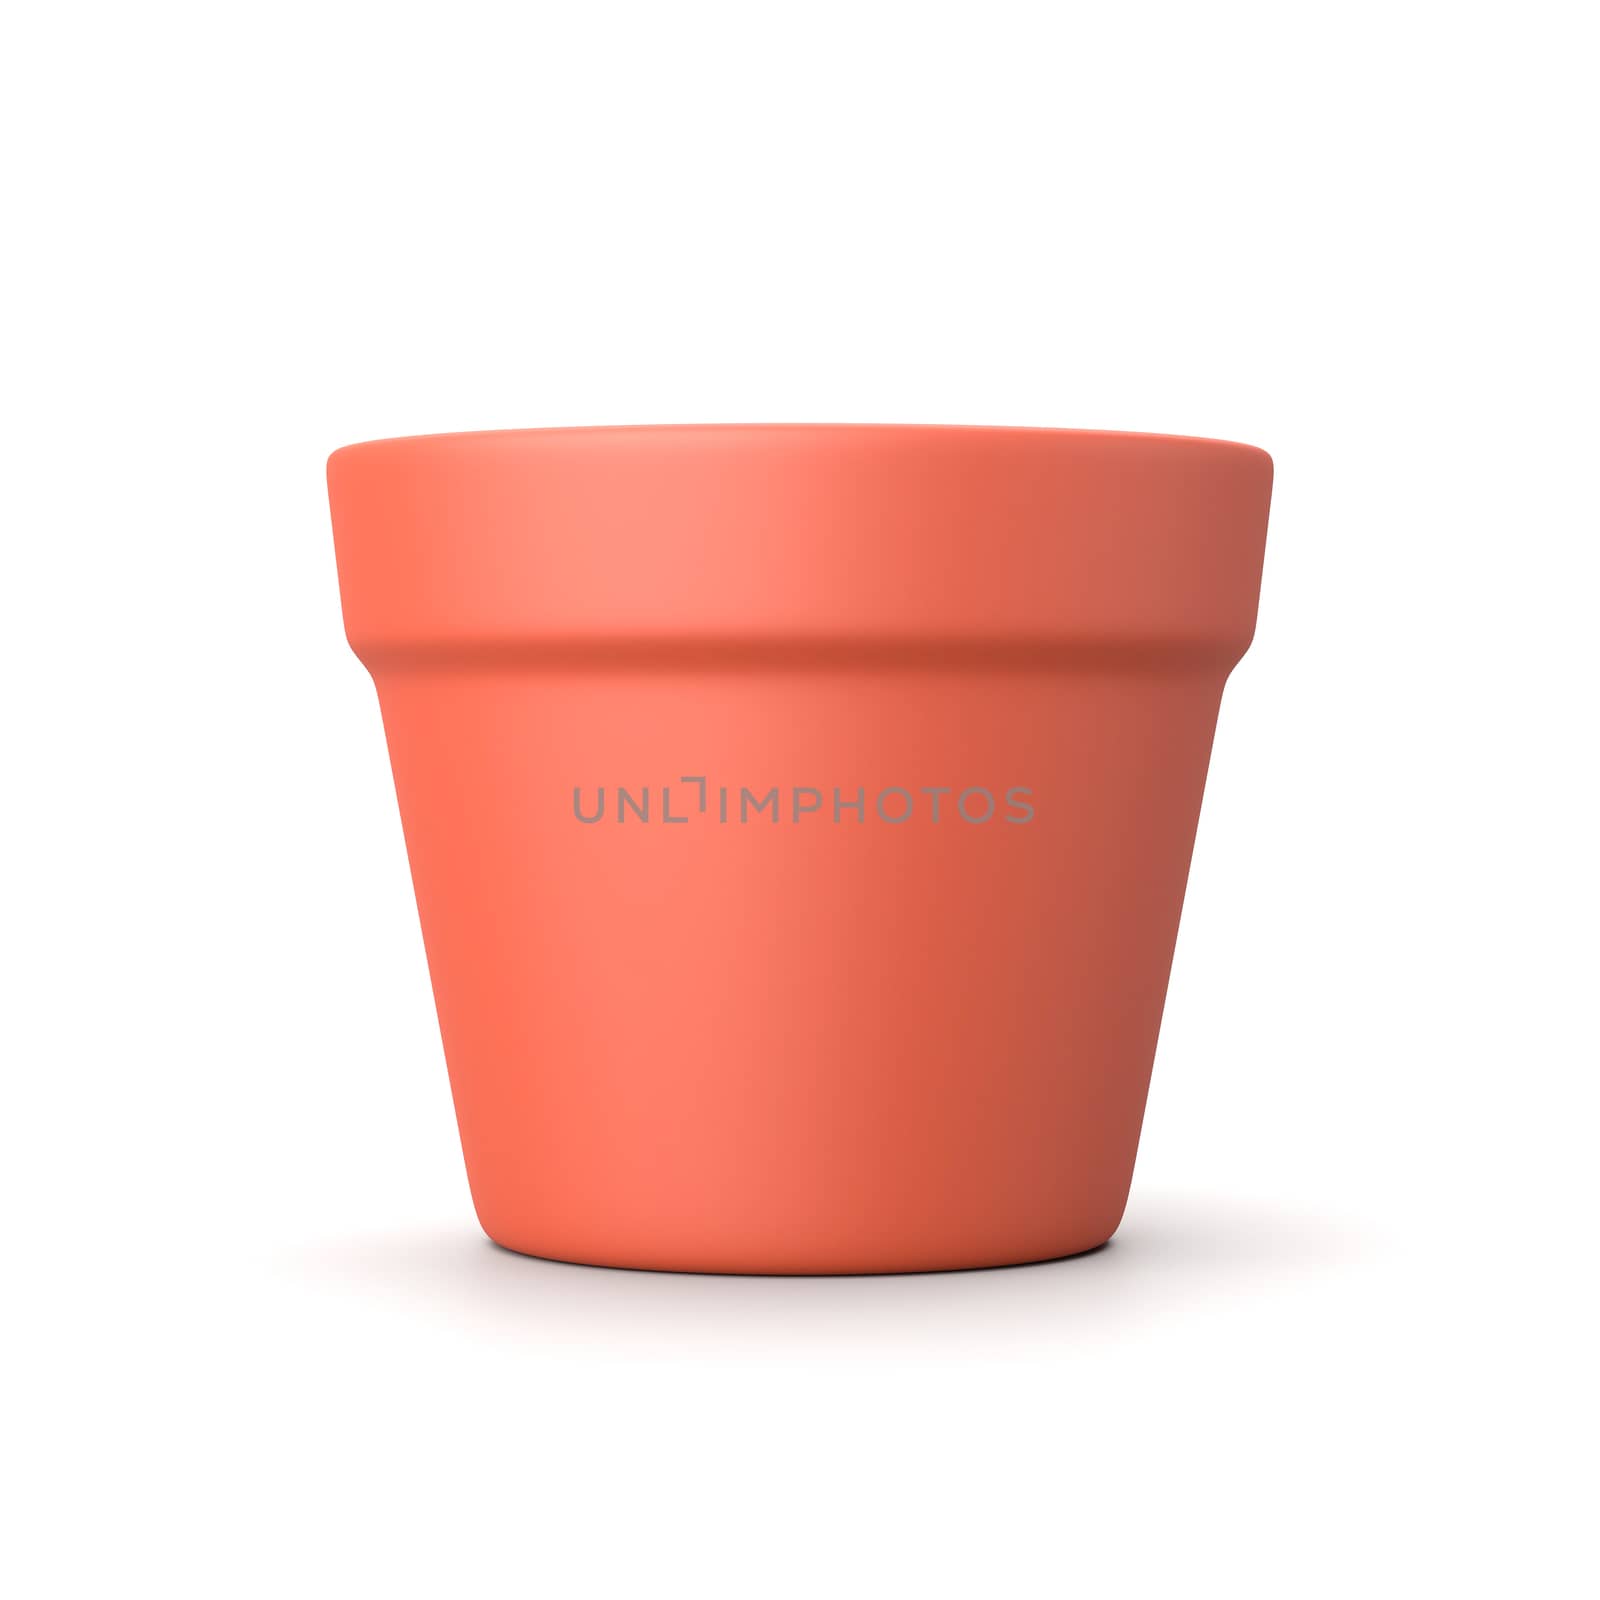 One Single Earthenware Empty Flowerpot Isolated on White Background 3D Illustration